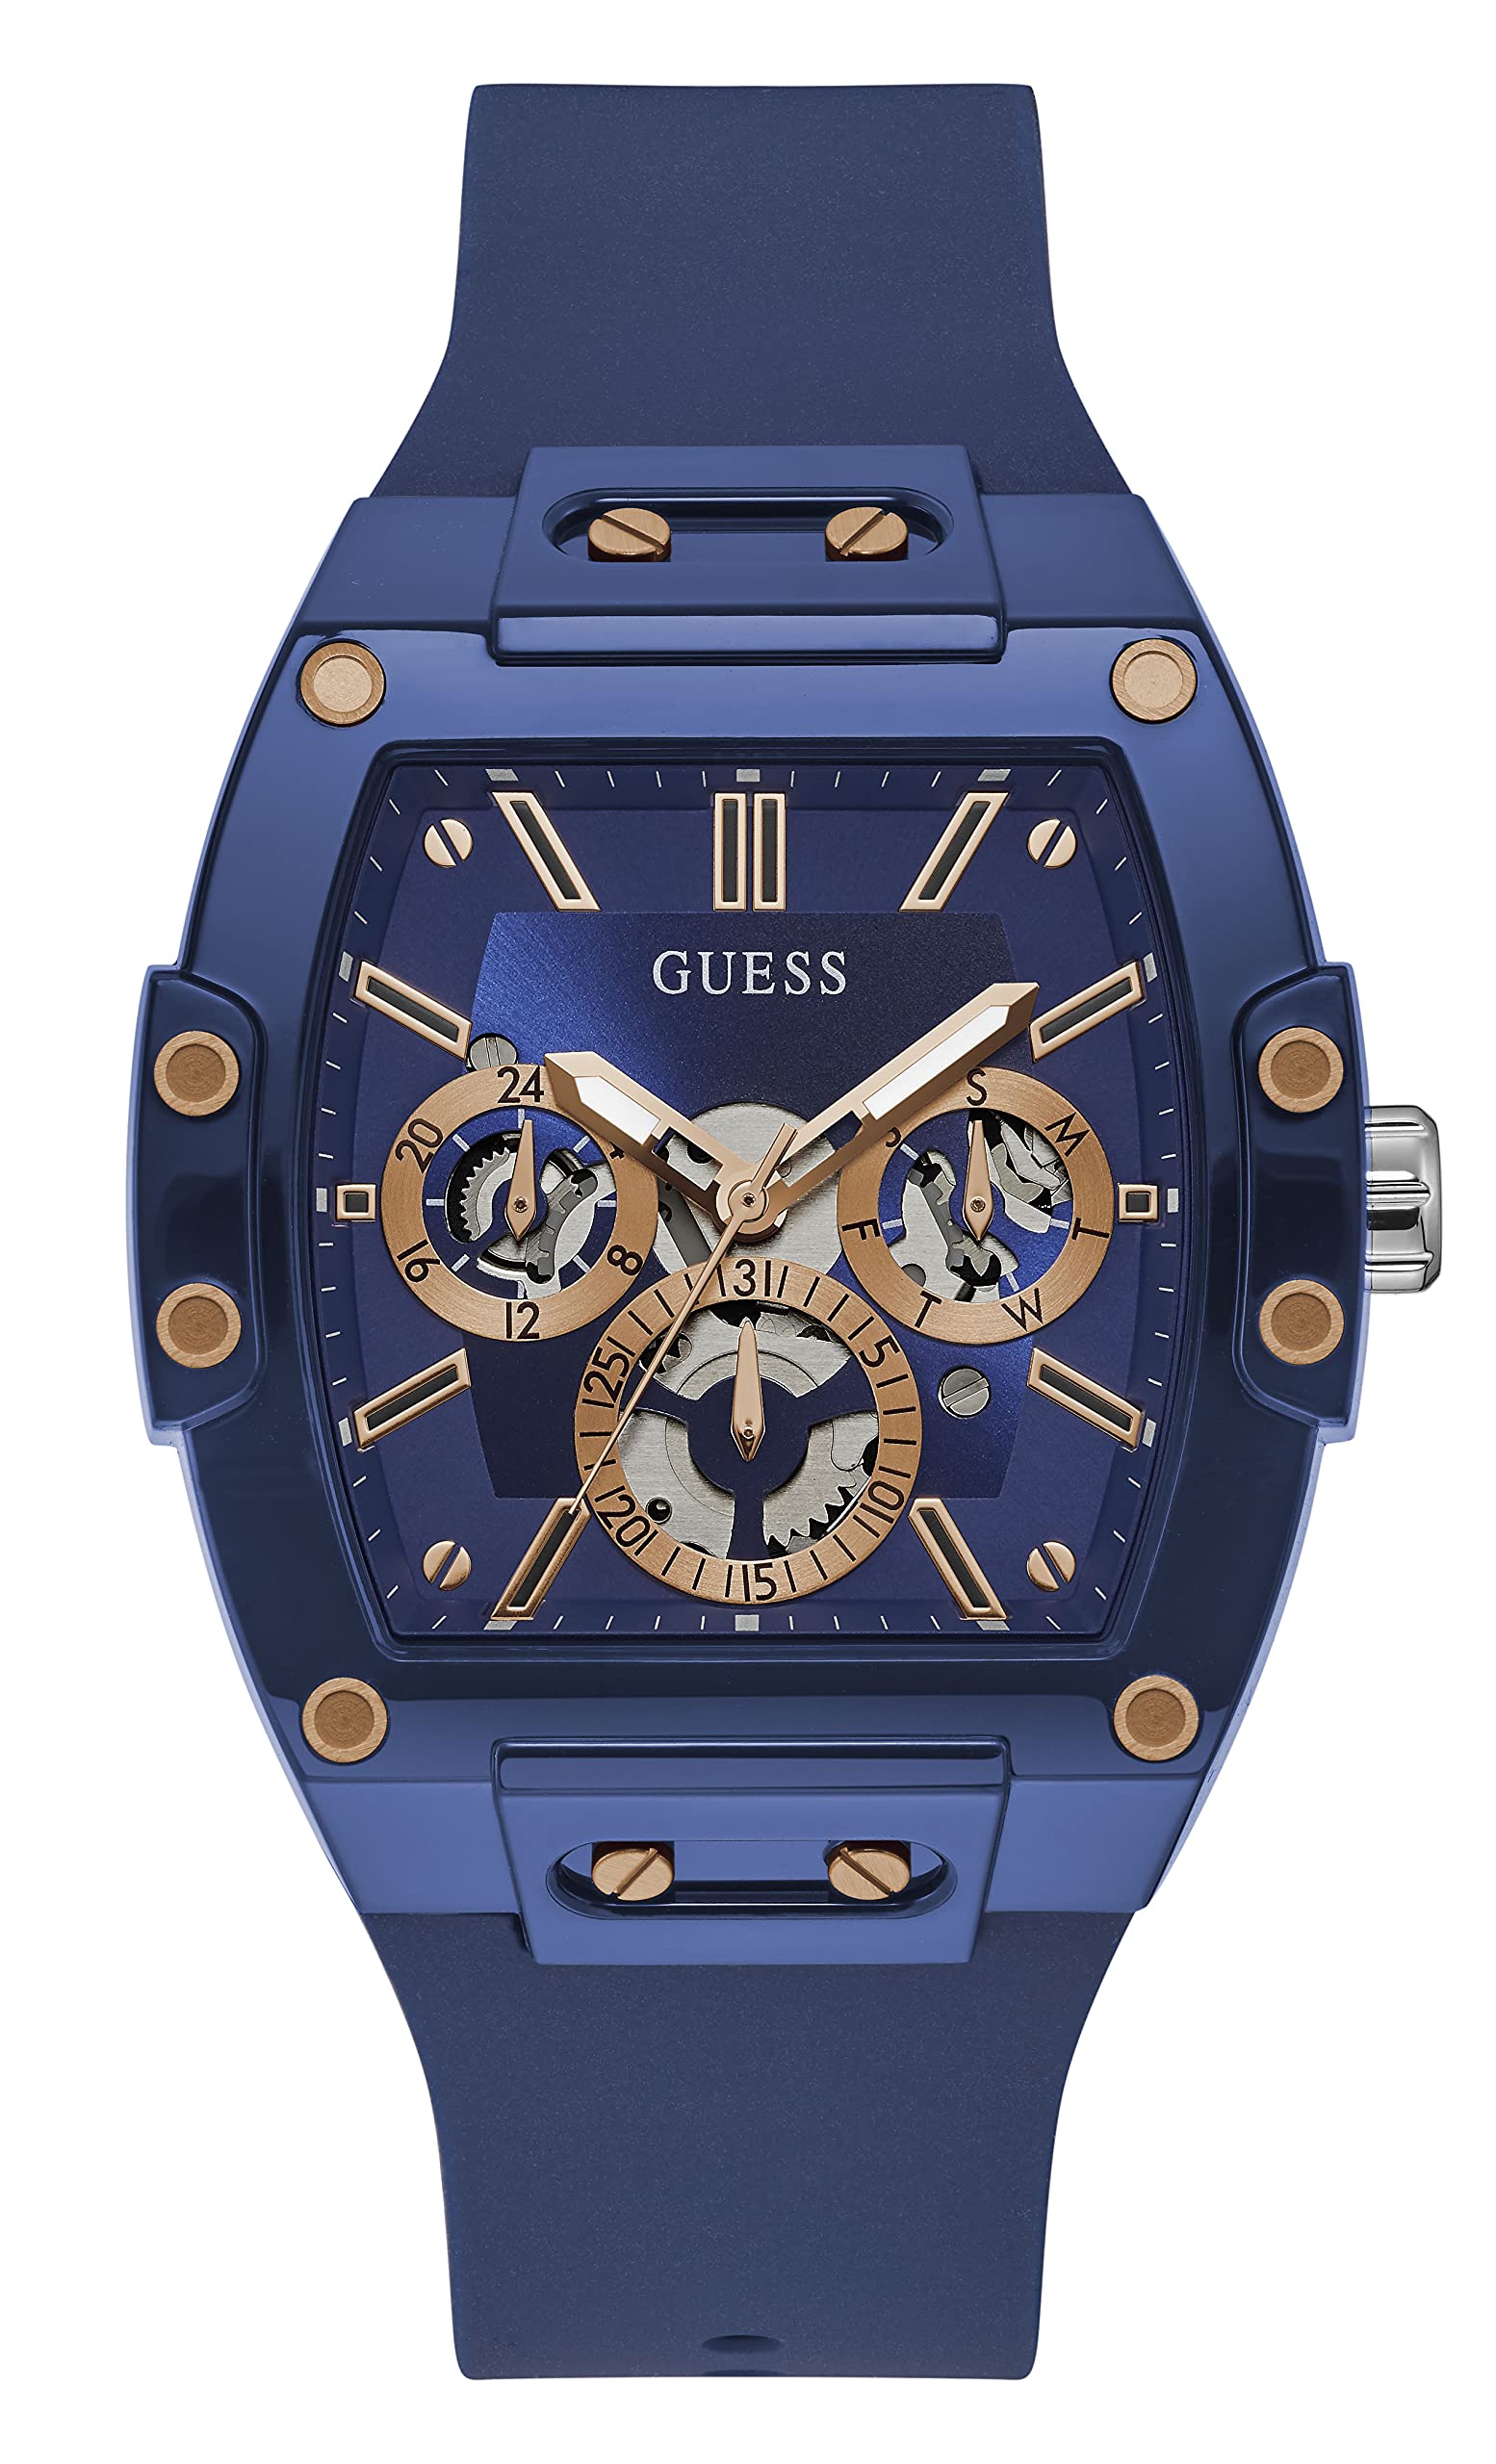 GUESS US Men's Rose Gold-Tone and Blue Silicone Multifunction Watch, one